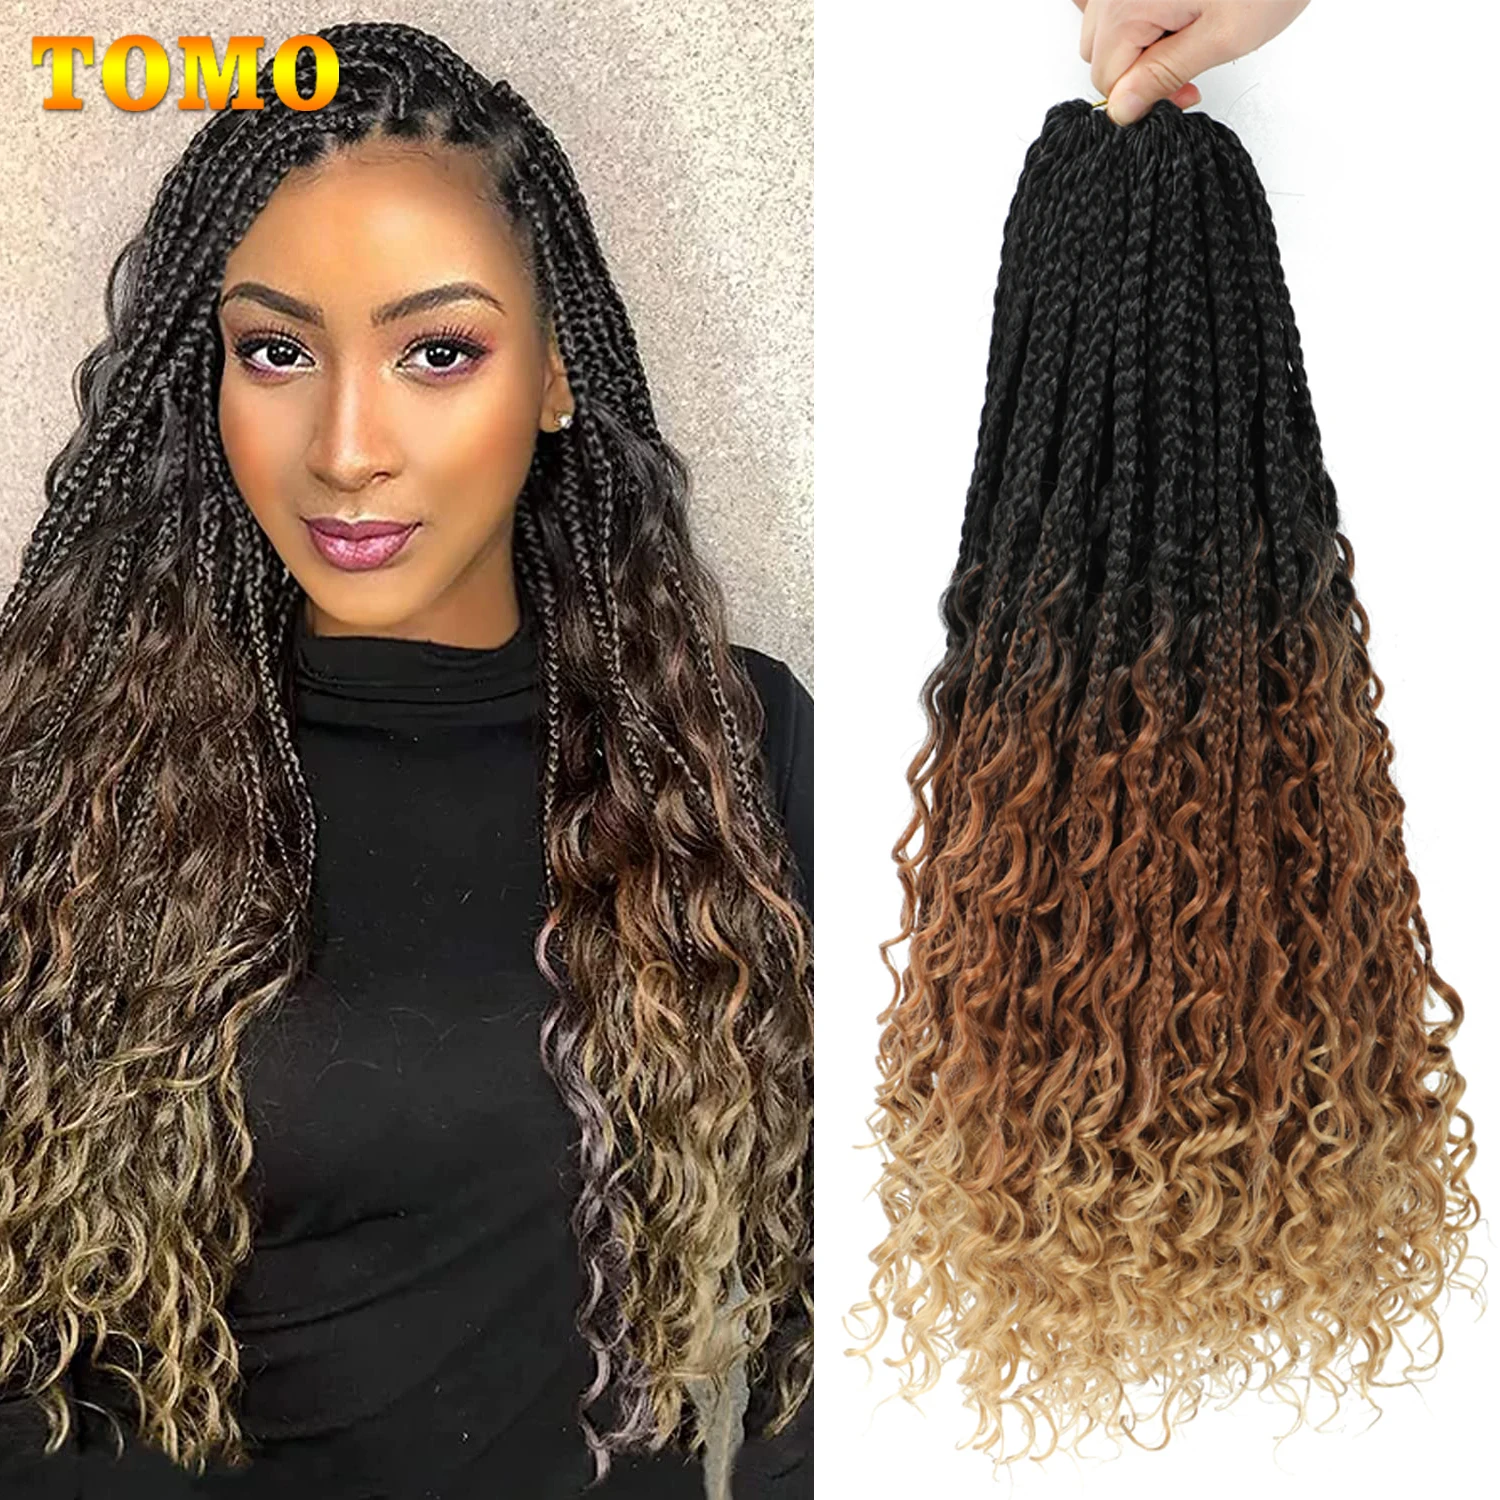 TOMO 14 18Inch Goddess Box Braids Crochet Hair With Curly Ends Synthetic Boho Box Braids Crochet Hair Extensions For Black Women